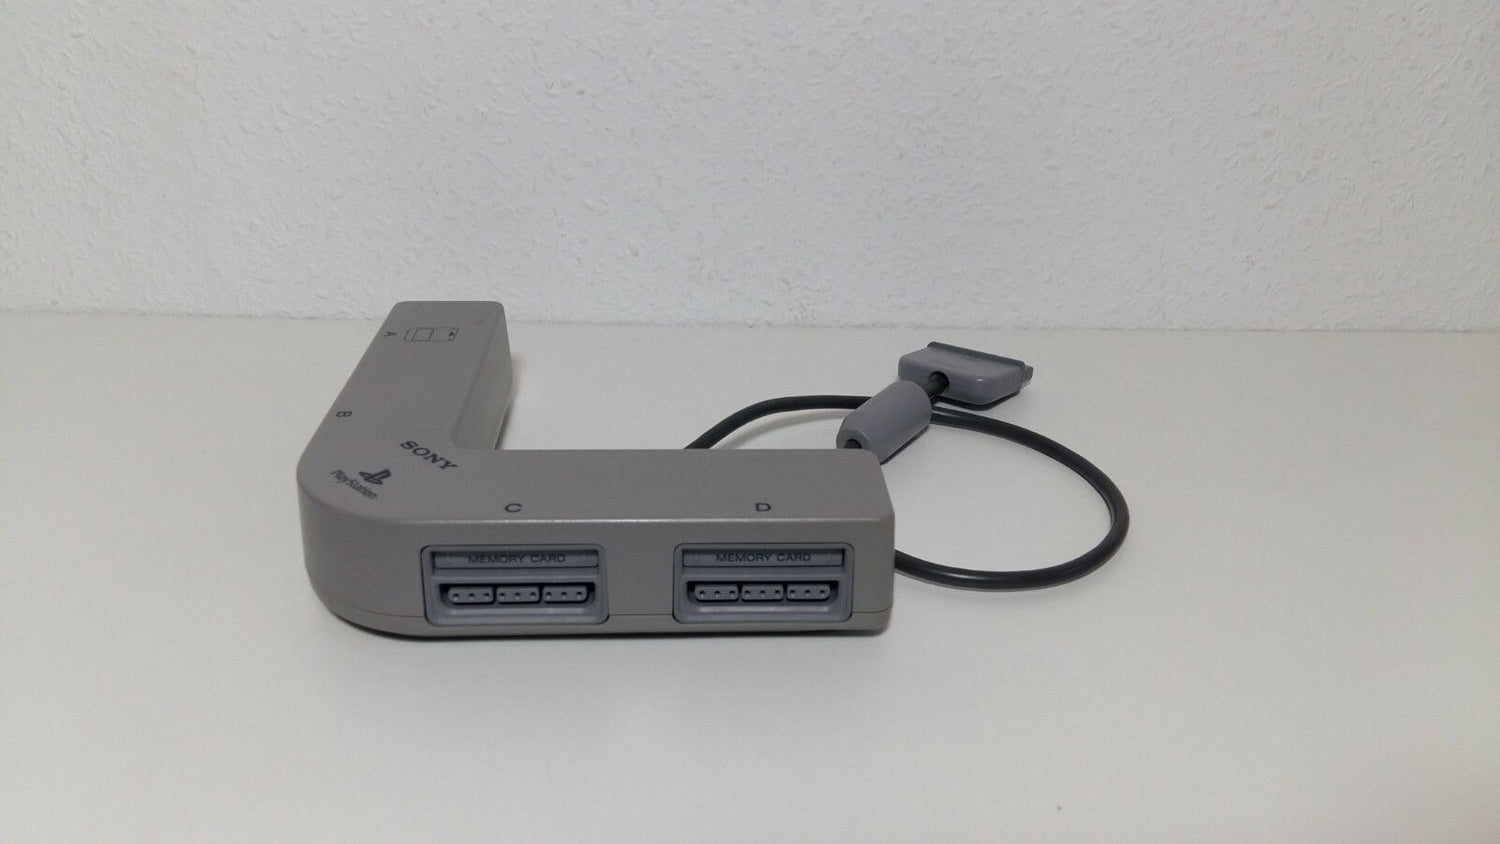 Sony Playstation 1 Multitap 4 player adapter